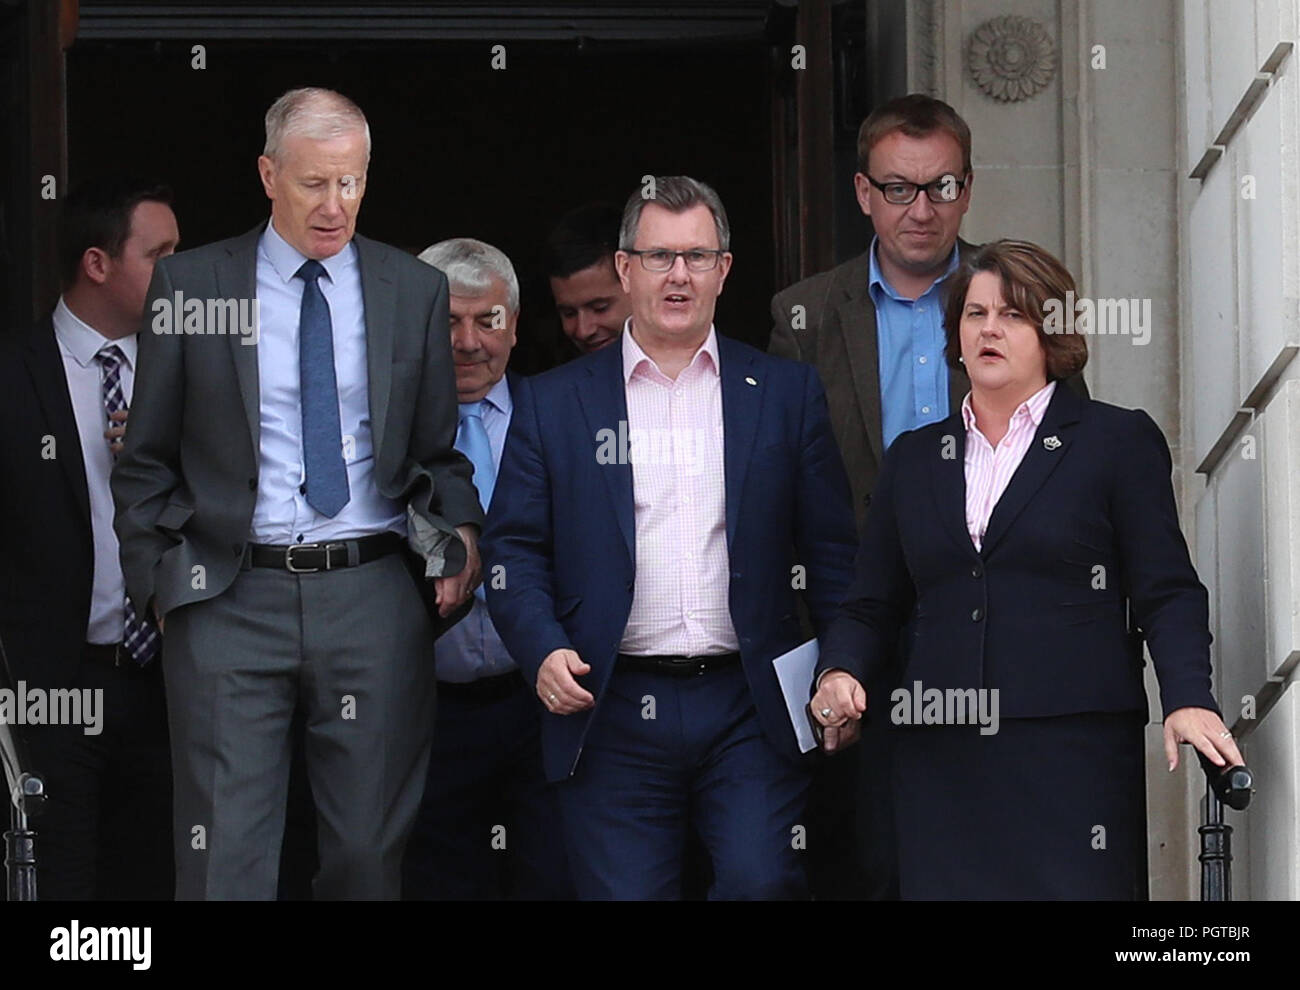 DUP leader Arlene Foster and party colleagues Gregory Campbell (left), Sir Jeffrey Donaldson (centre) and Christopher Stalford (right, blue shirt) arrive for a press conference outside Parliament Buildings at Stormont in Belfast. The Government has acknowledged the deep frustration of the public in Northern Ireland as the region reached an unwanted milestone for non-governance. Stock Photo